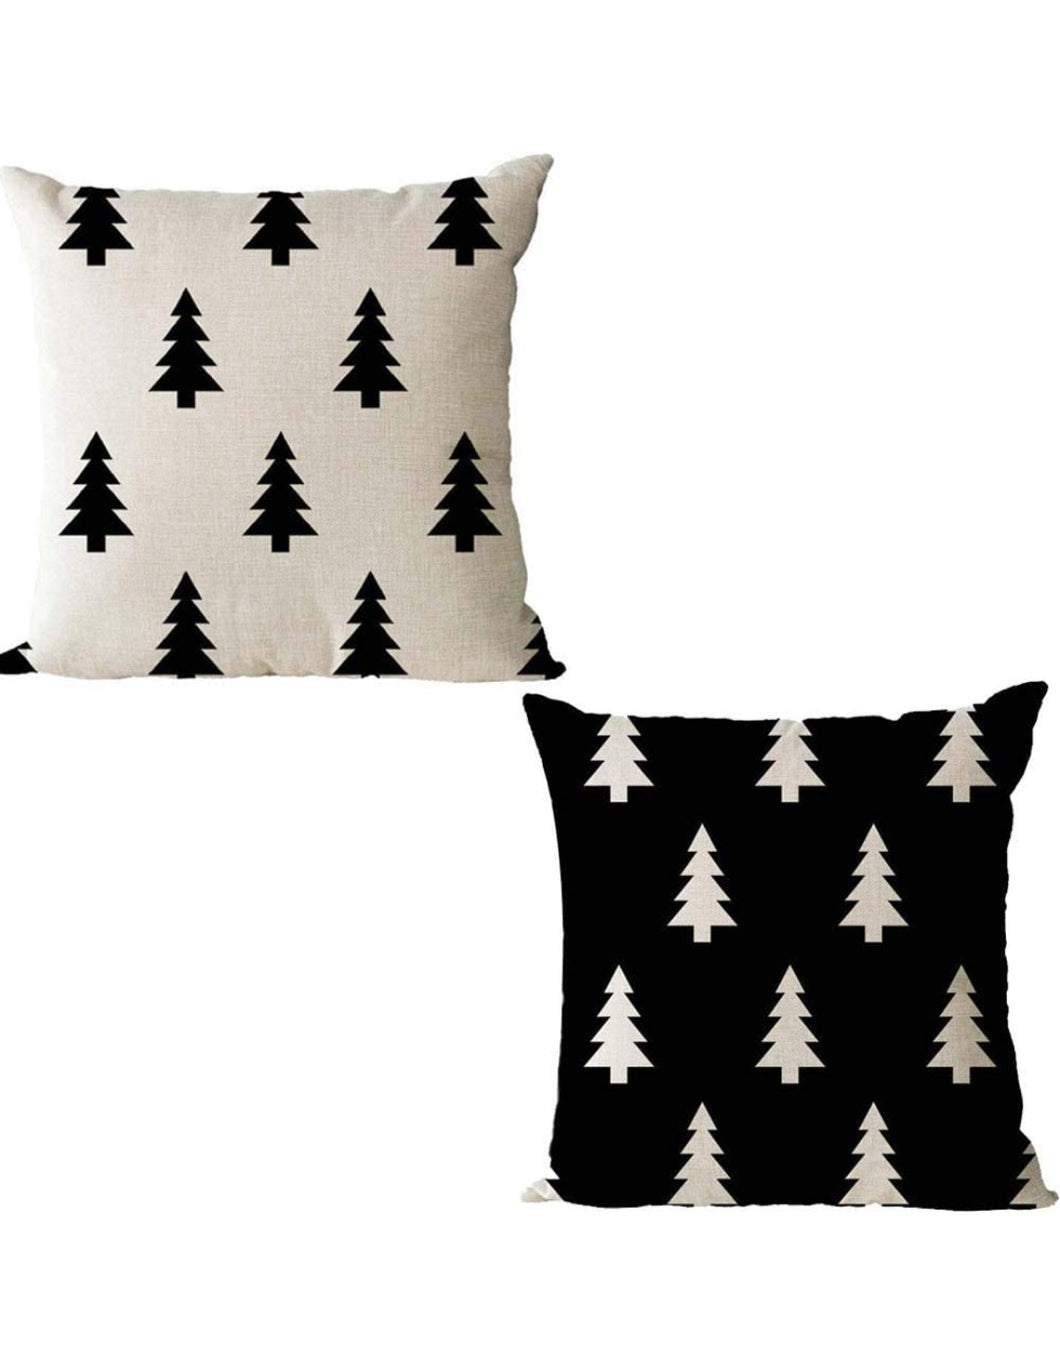 Black and White Christmas Trees Pillow Covers - Set of 2